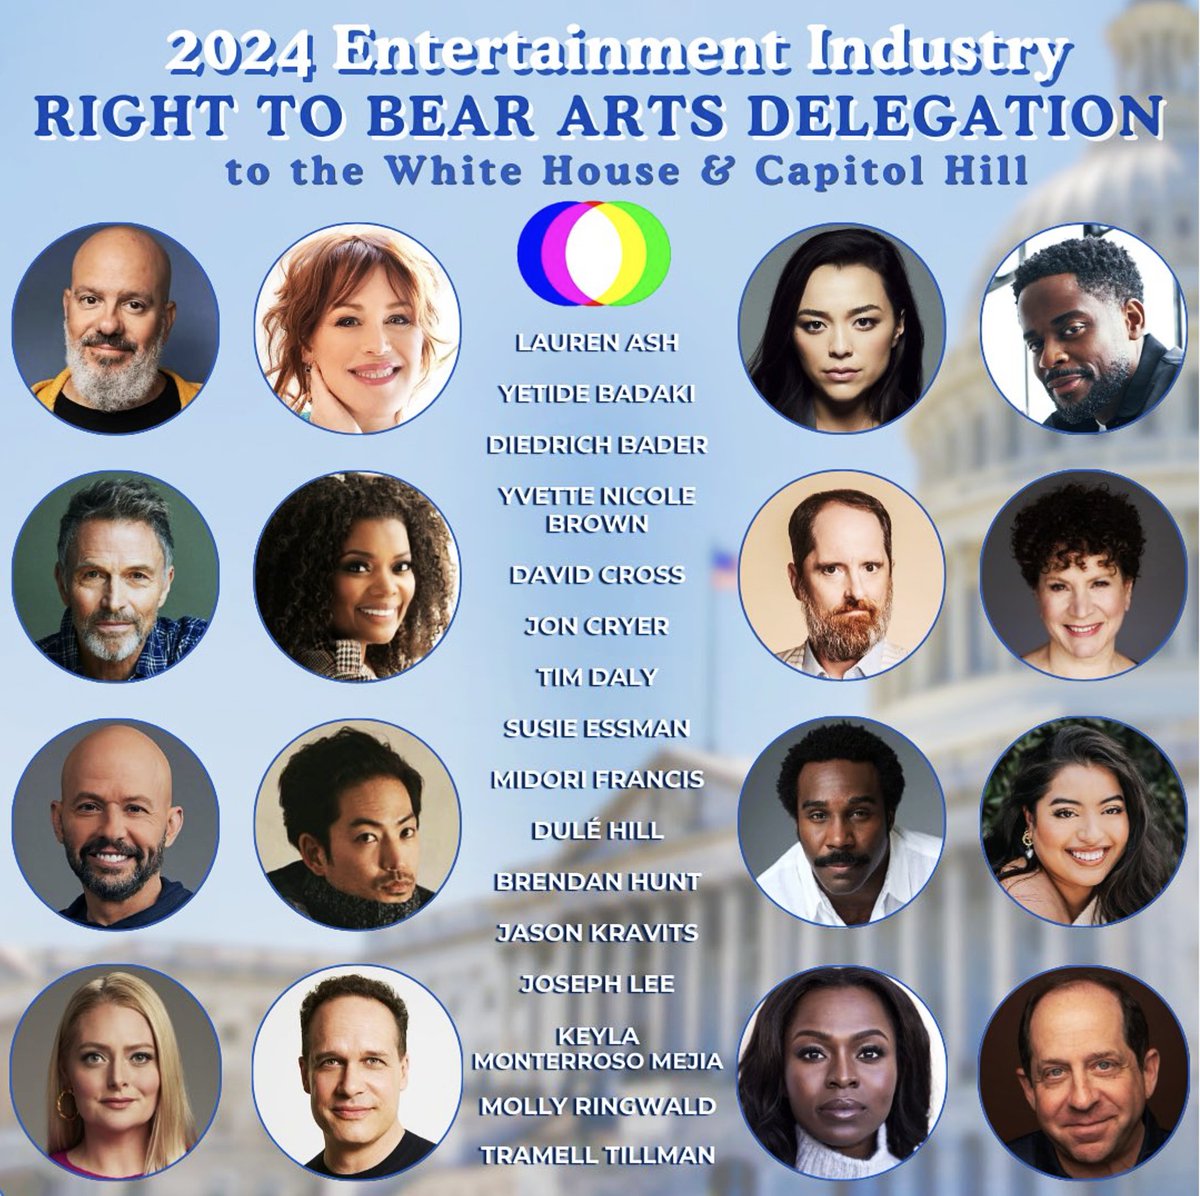 Such an important trip each year. These are the 2024 #righttobeararts entertainment industry delegates joining @thecreativecoalition from April 25-27, on the annual advocacy trip to the White House and Capitol Hill to support increased public funding for the arts. #artsadvocacy